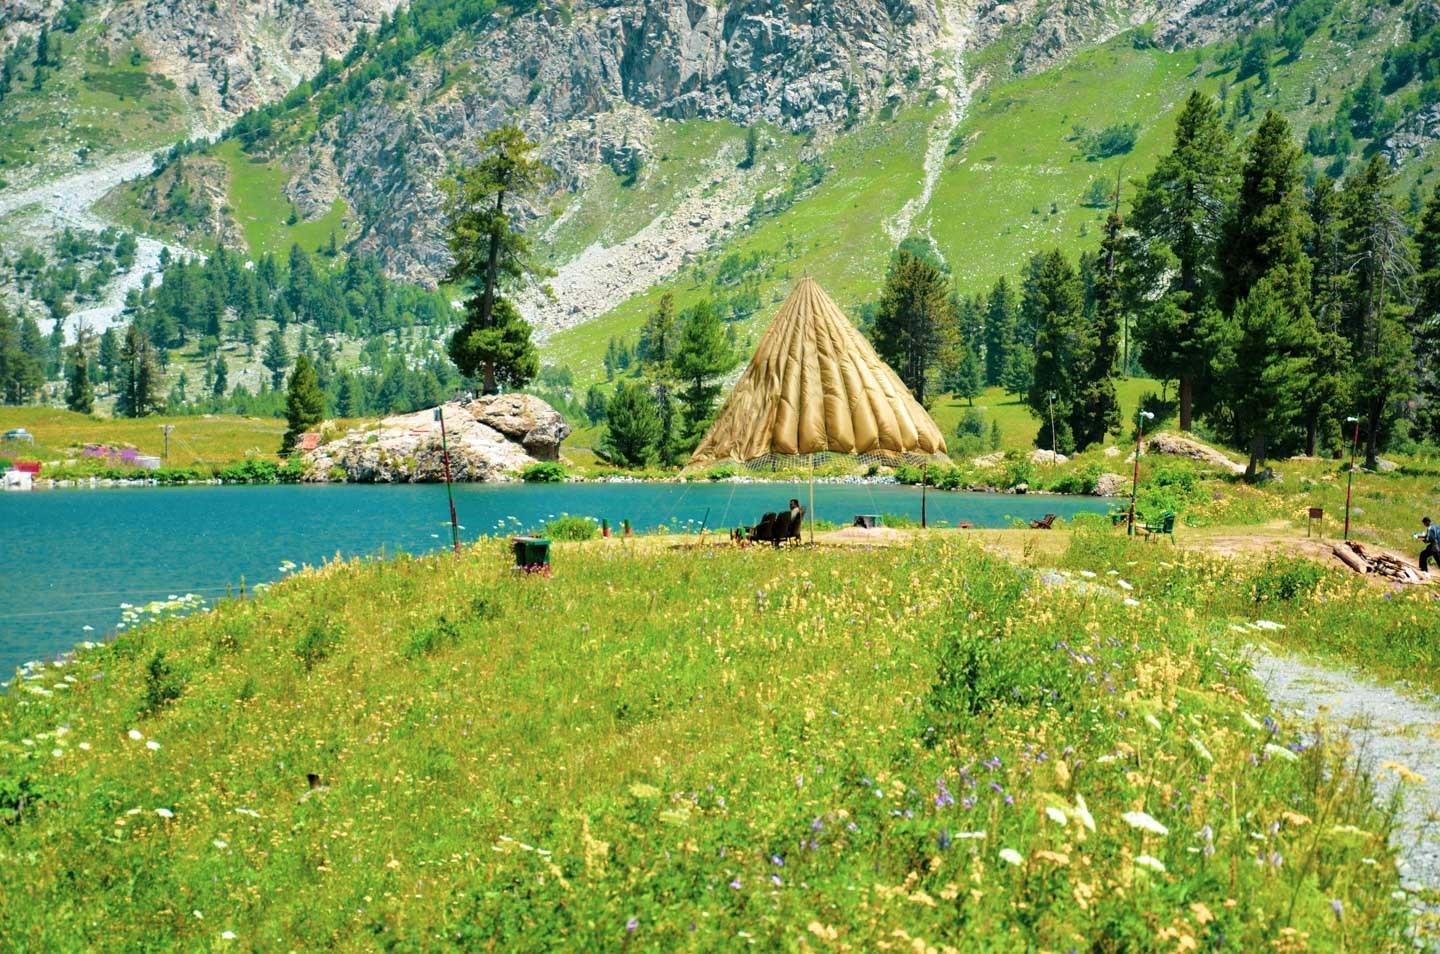 Enjoying leisure in the tranquil Minimarg Valley